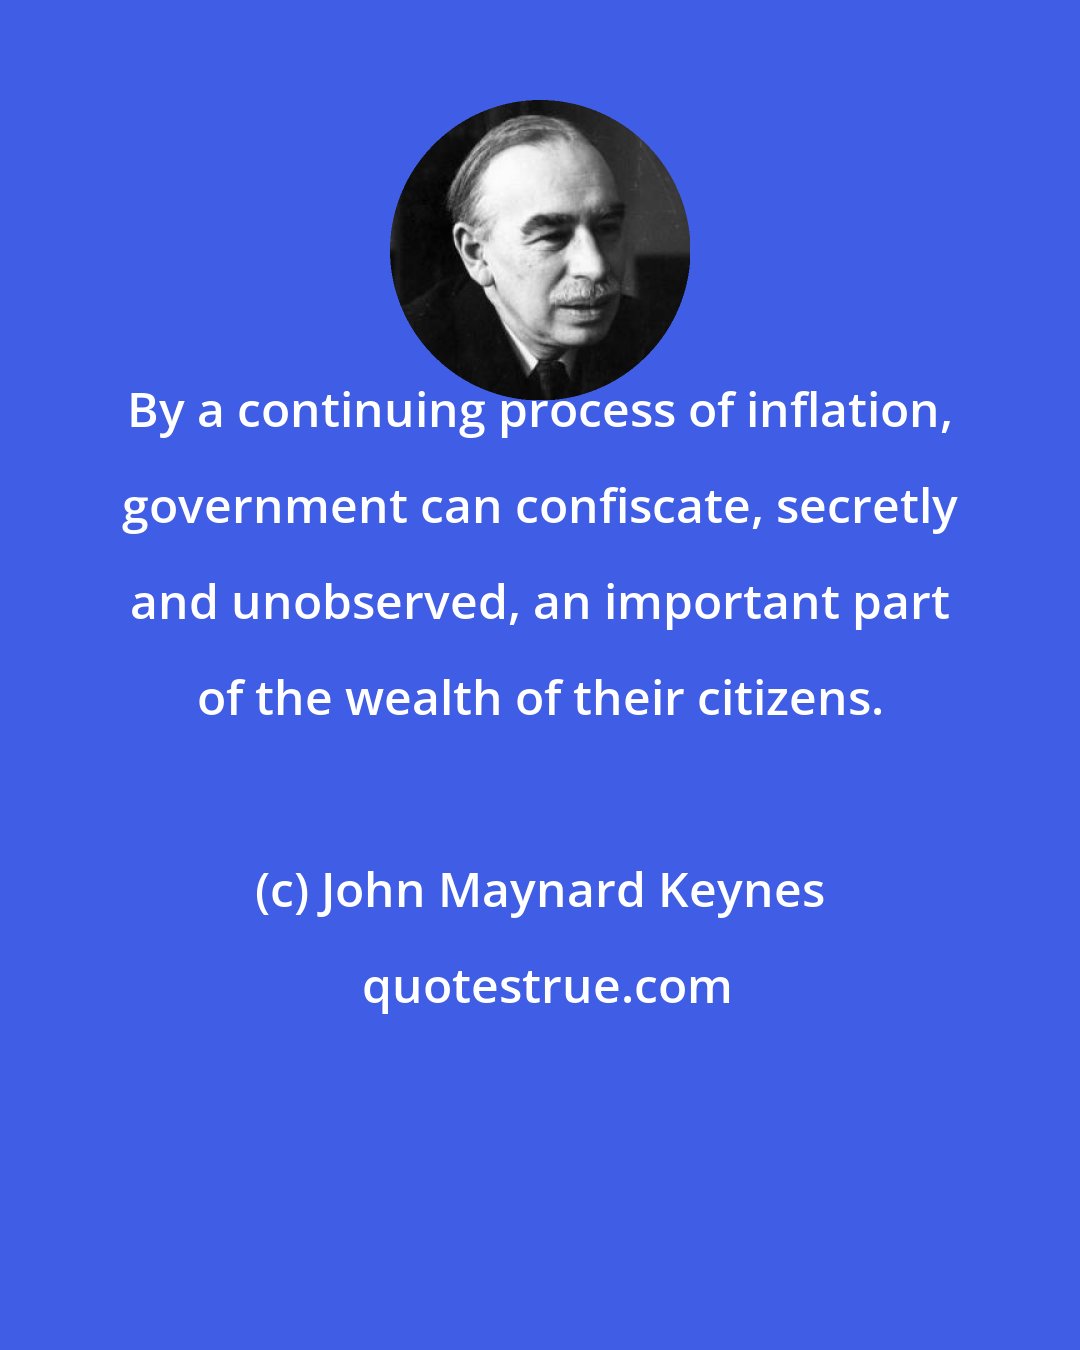 John Maynard Keynes: By a continuing process of inflation, government can confiscate, secretly and unobserved, an important part of the wealth of their citizens.